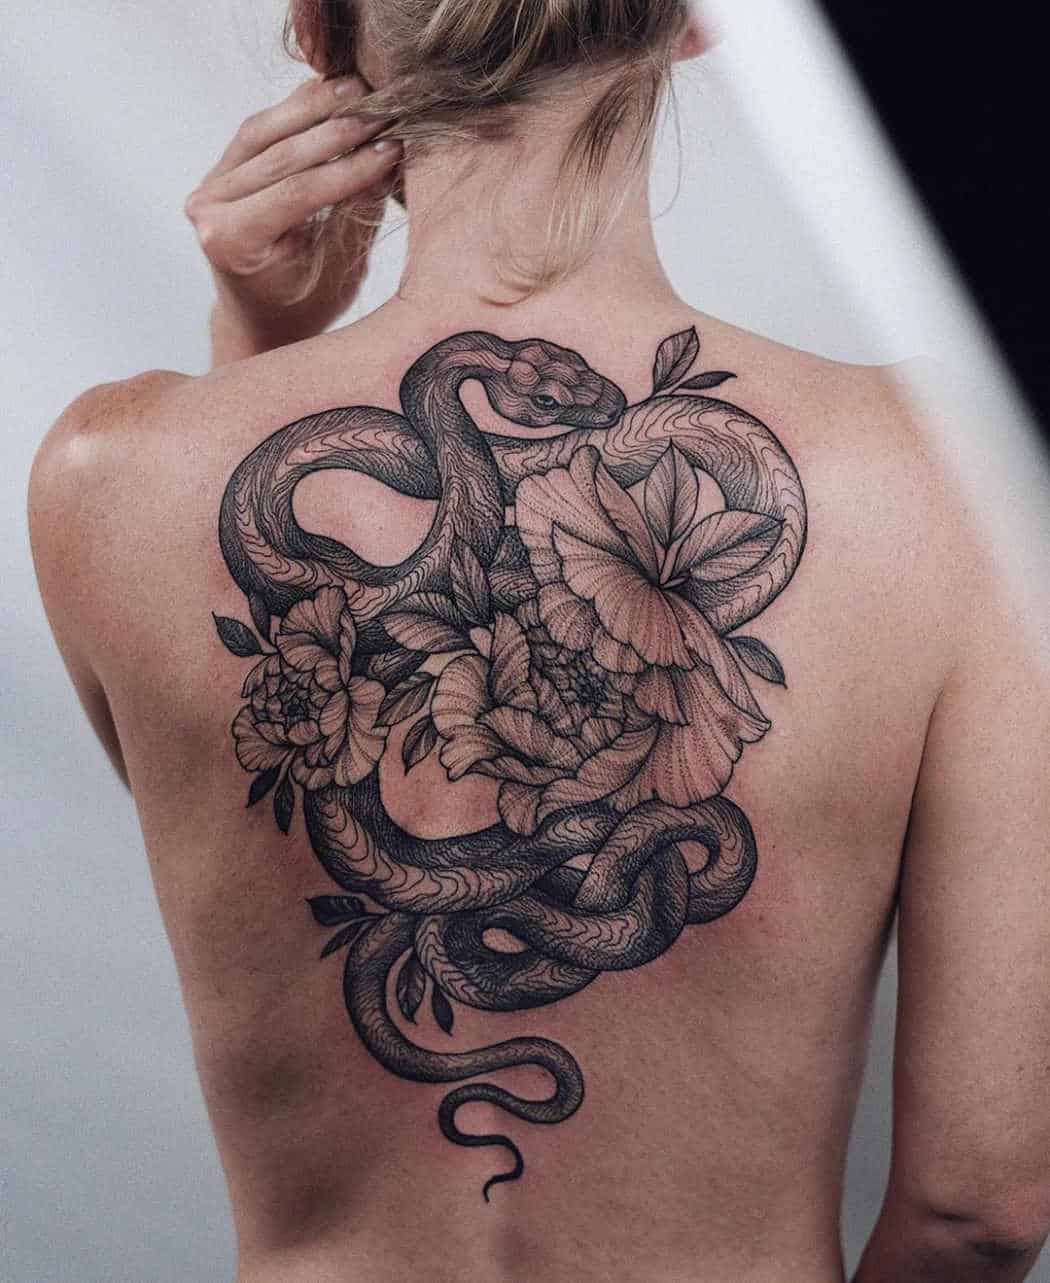 Snake floral tattoo